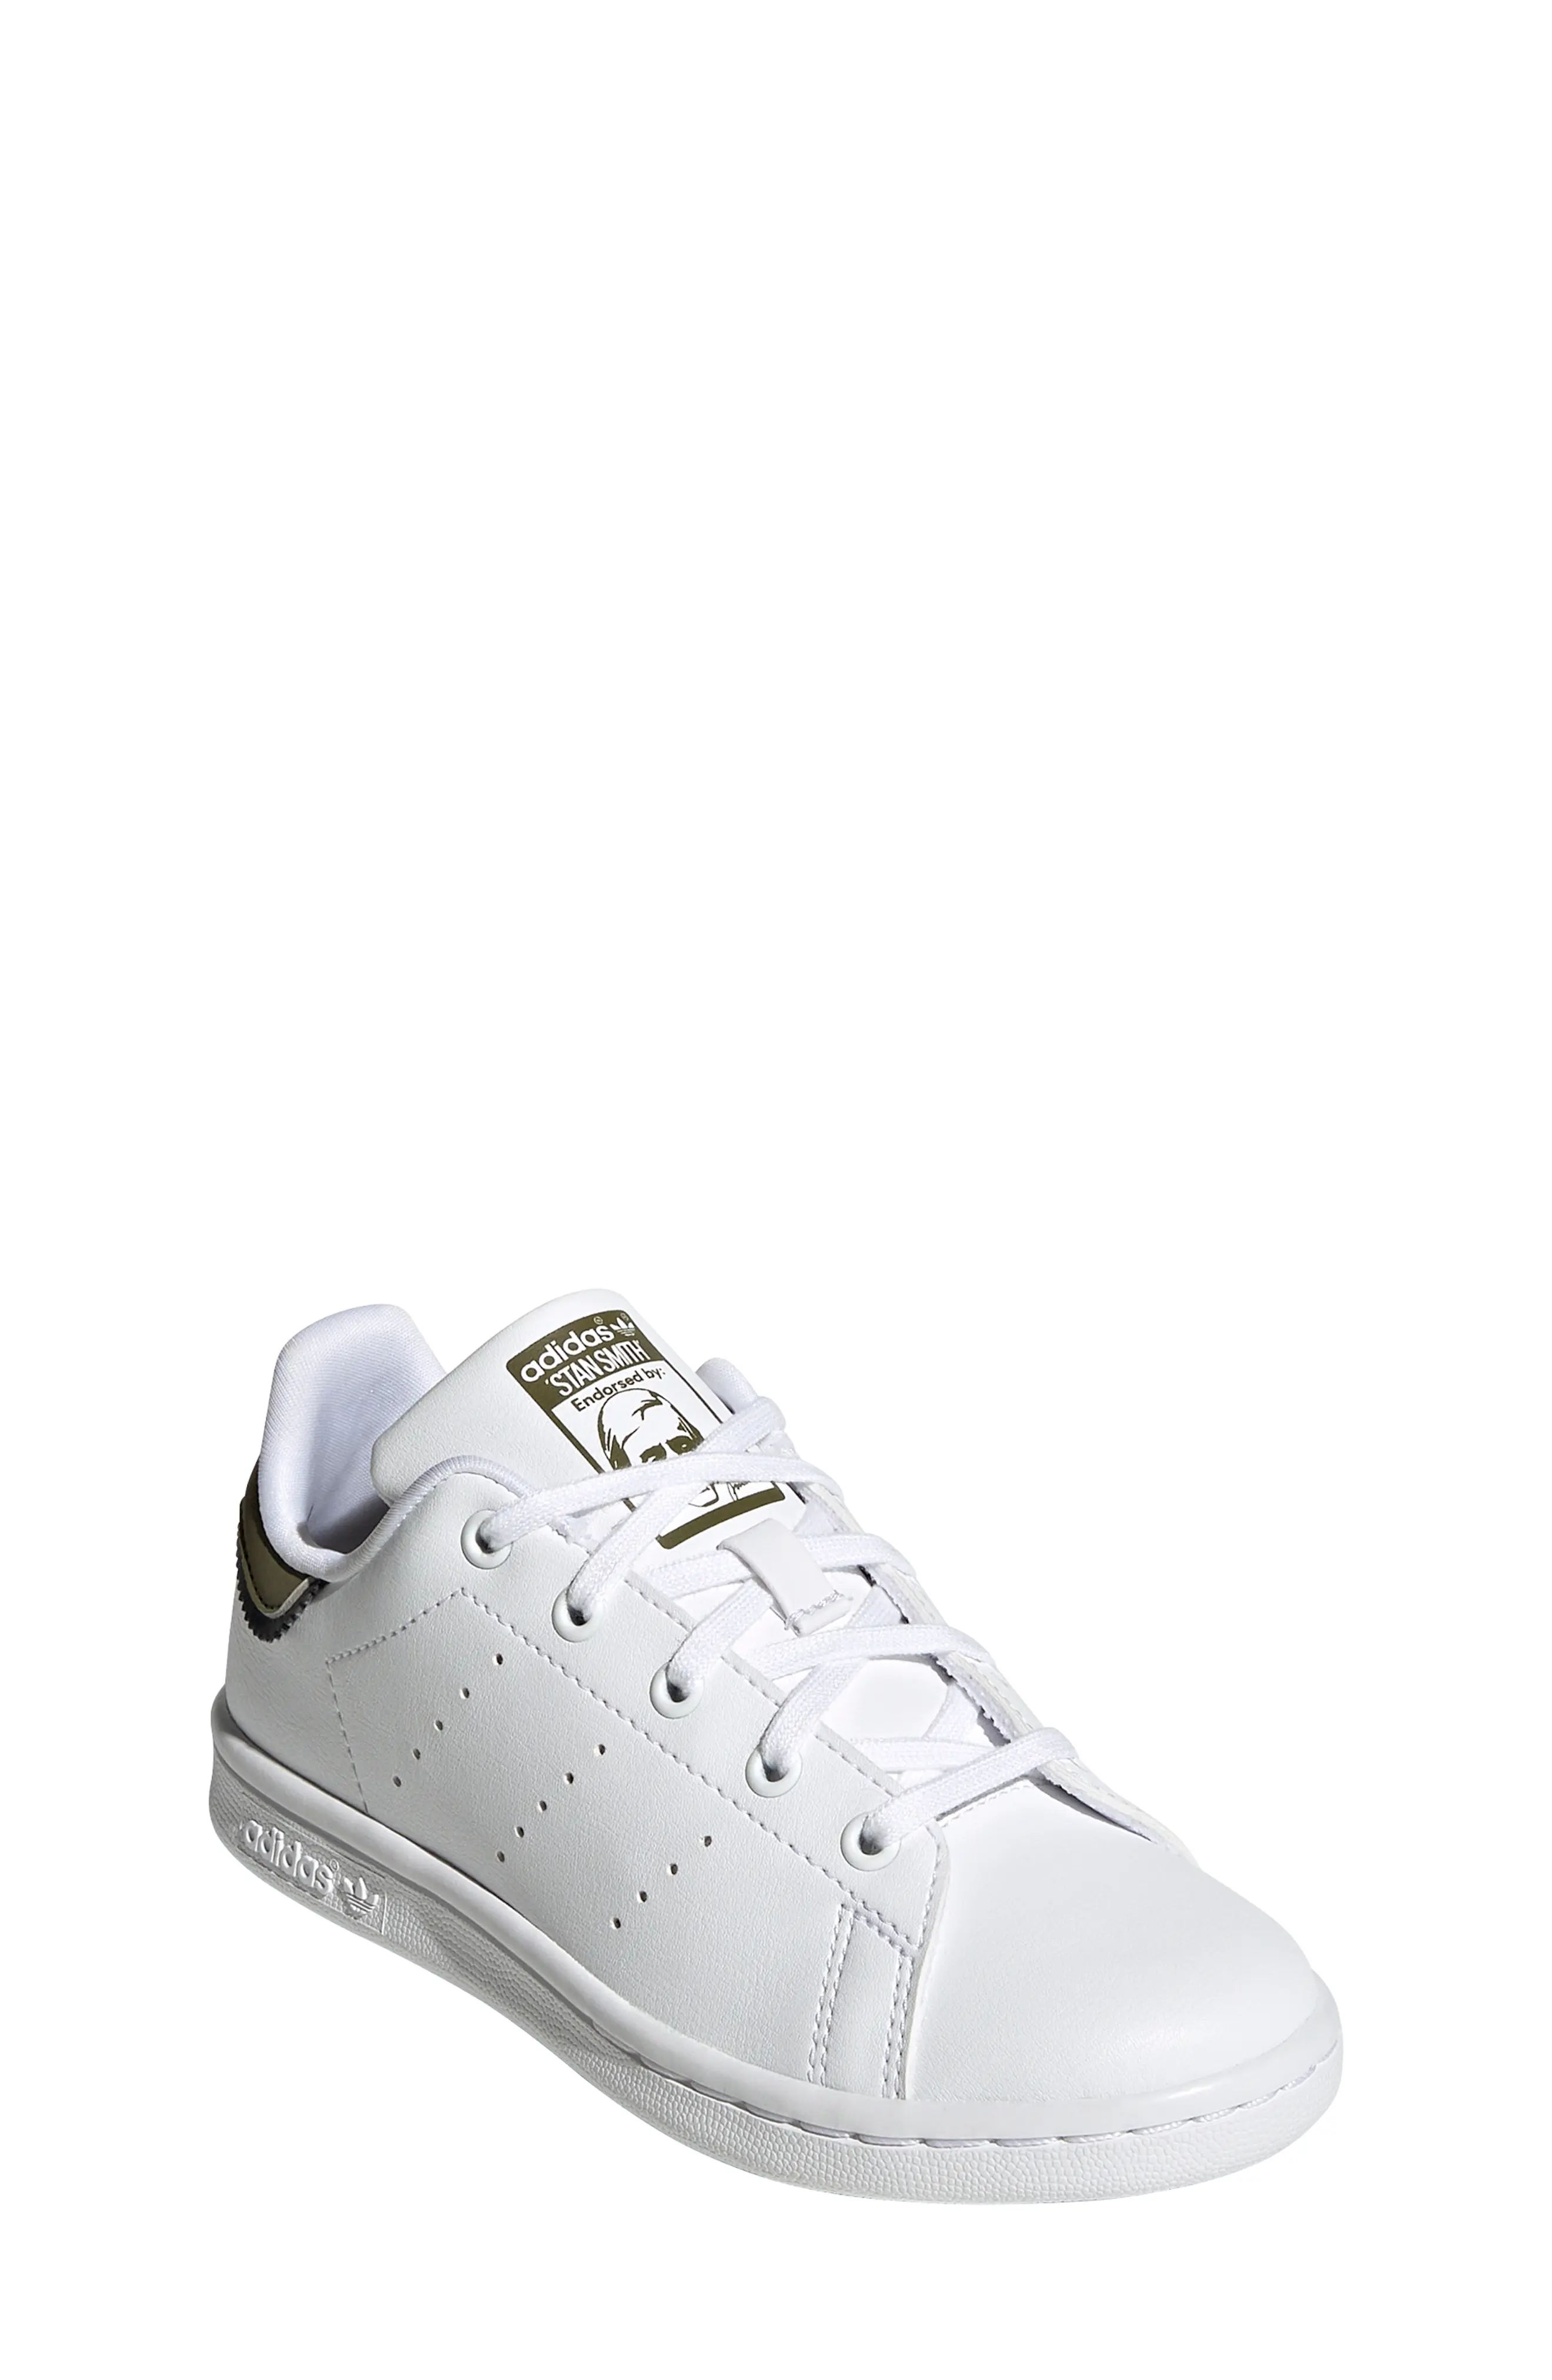 adidas Stan Smith Low Top Sneaker in Ftwr White/Focus Olive at Nordstrom, Size 3.5 M | Nordstrom